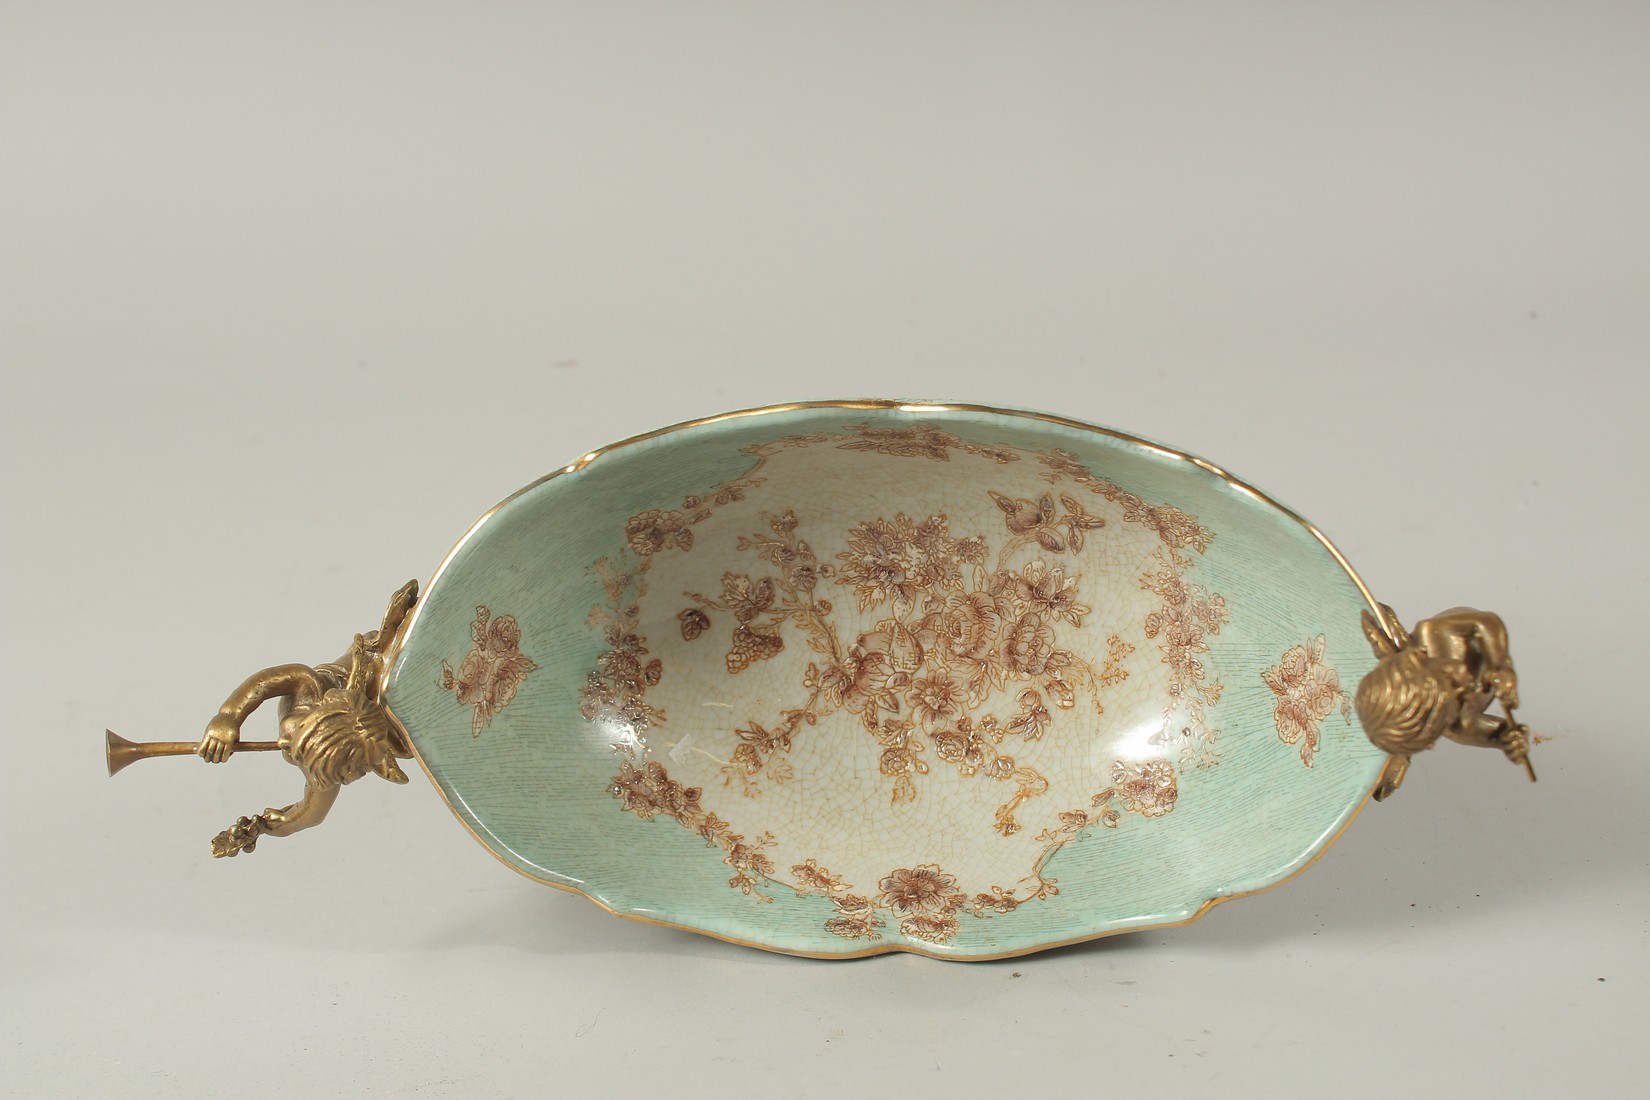 A SEVRES STYLE PORCELAIN AND GILT METAL OVAL COMPORT with cupid handles. 28cms long. - Image 5 of 5